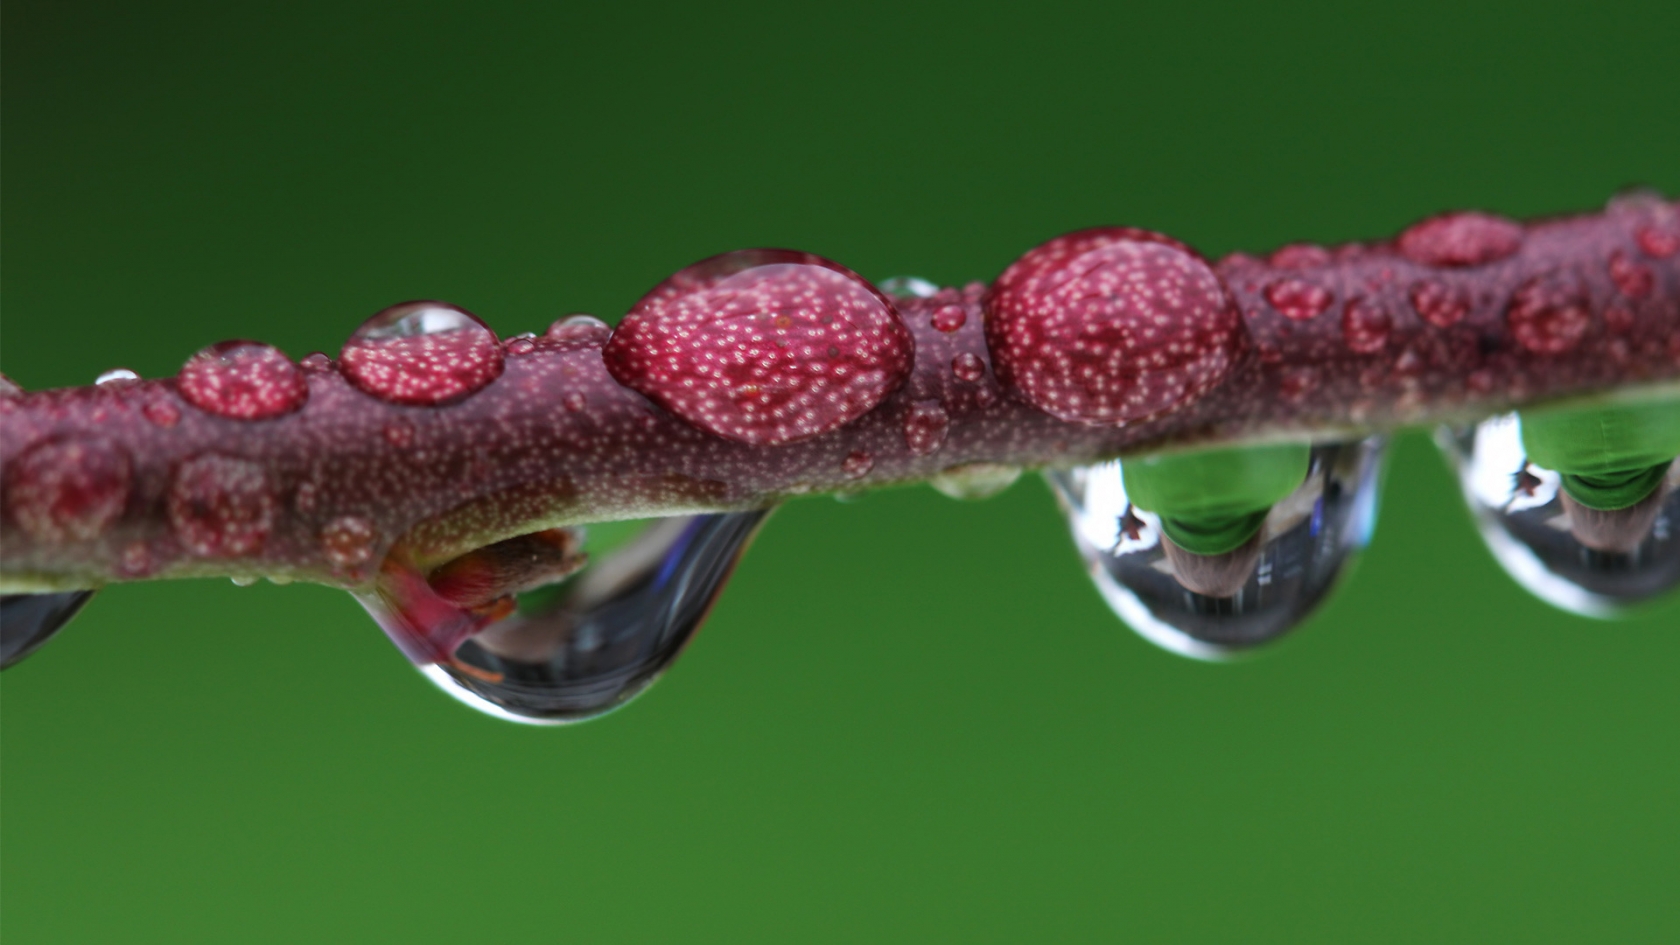 Droplet magnified branch for 1680 x 945 HDTV resolution